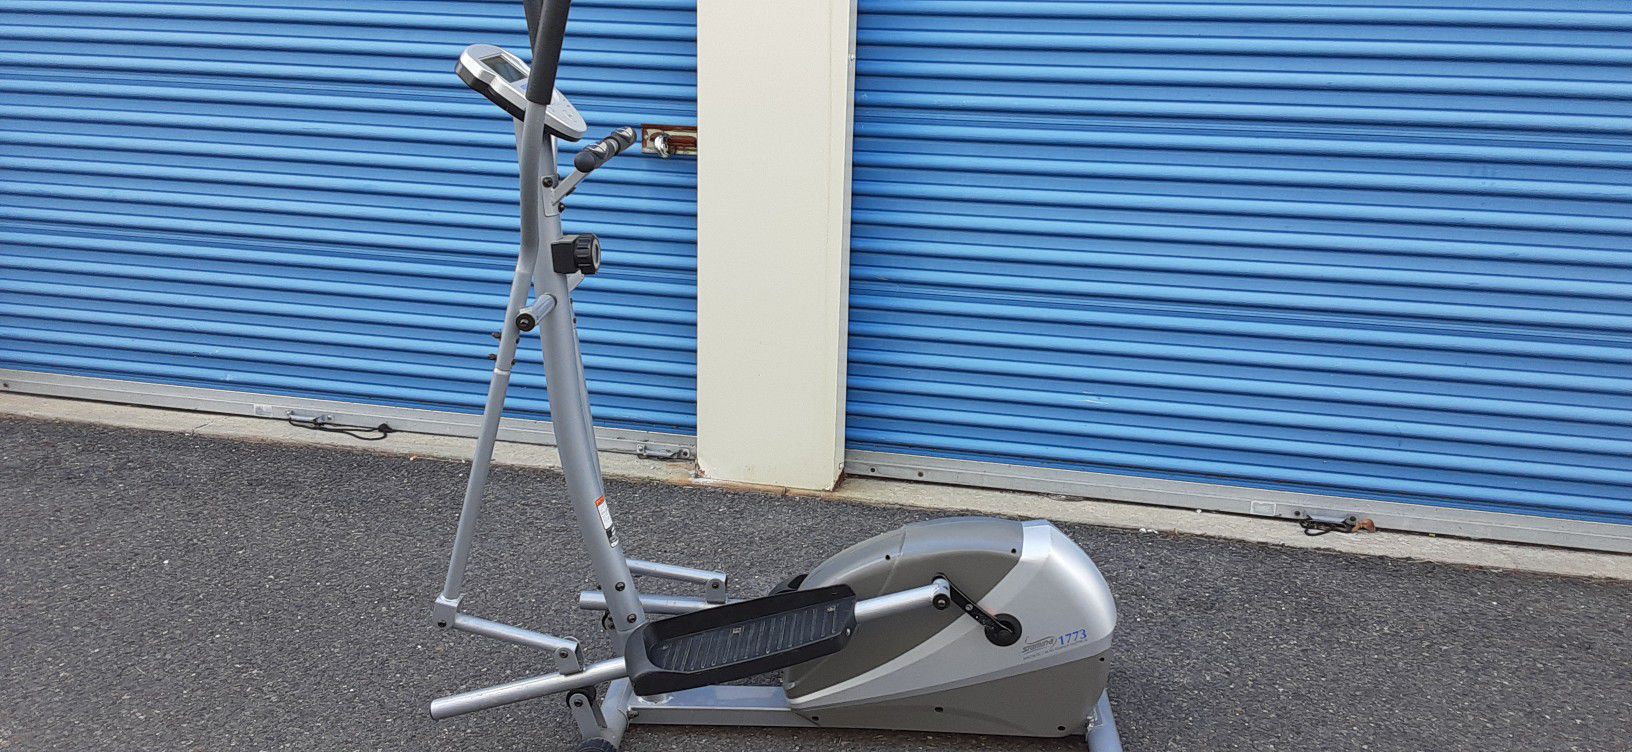 Elliptical exercise unit excellent new condition lightweight sturdy and ready for immediate use monitors your progress pick up or curbside del. avail